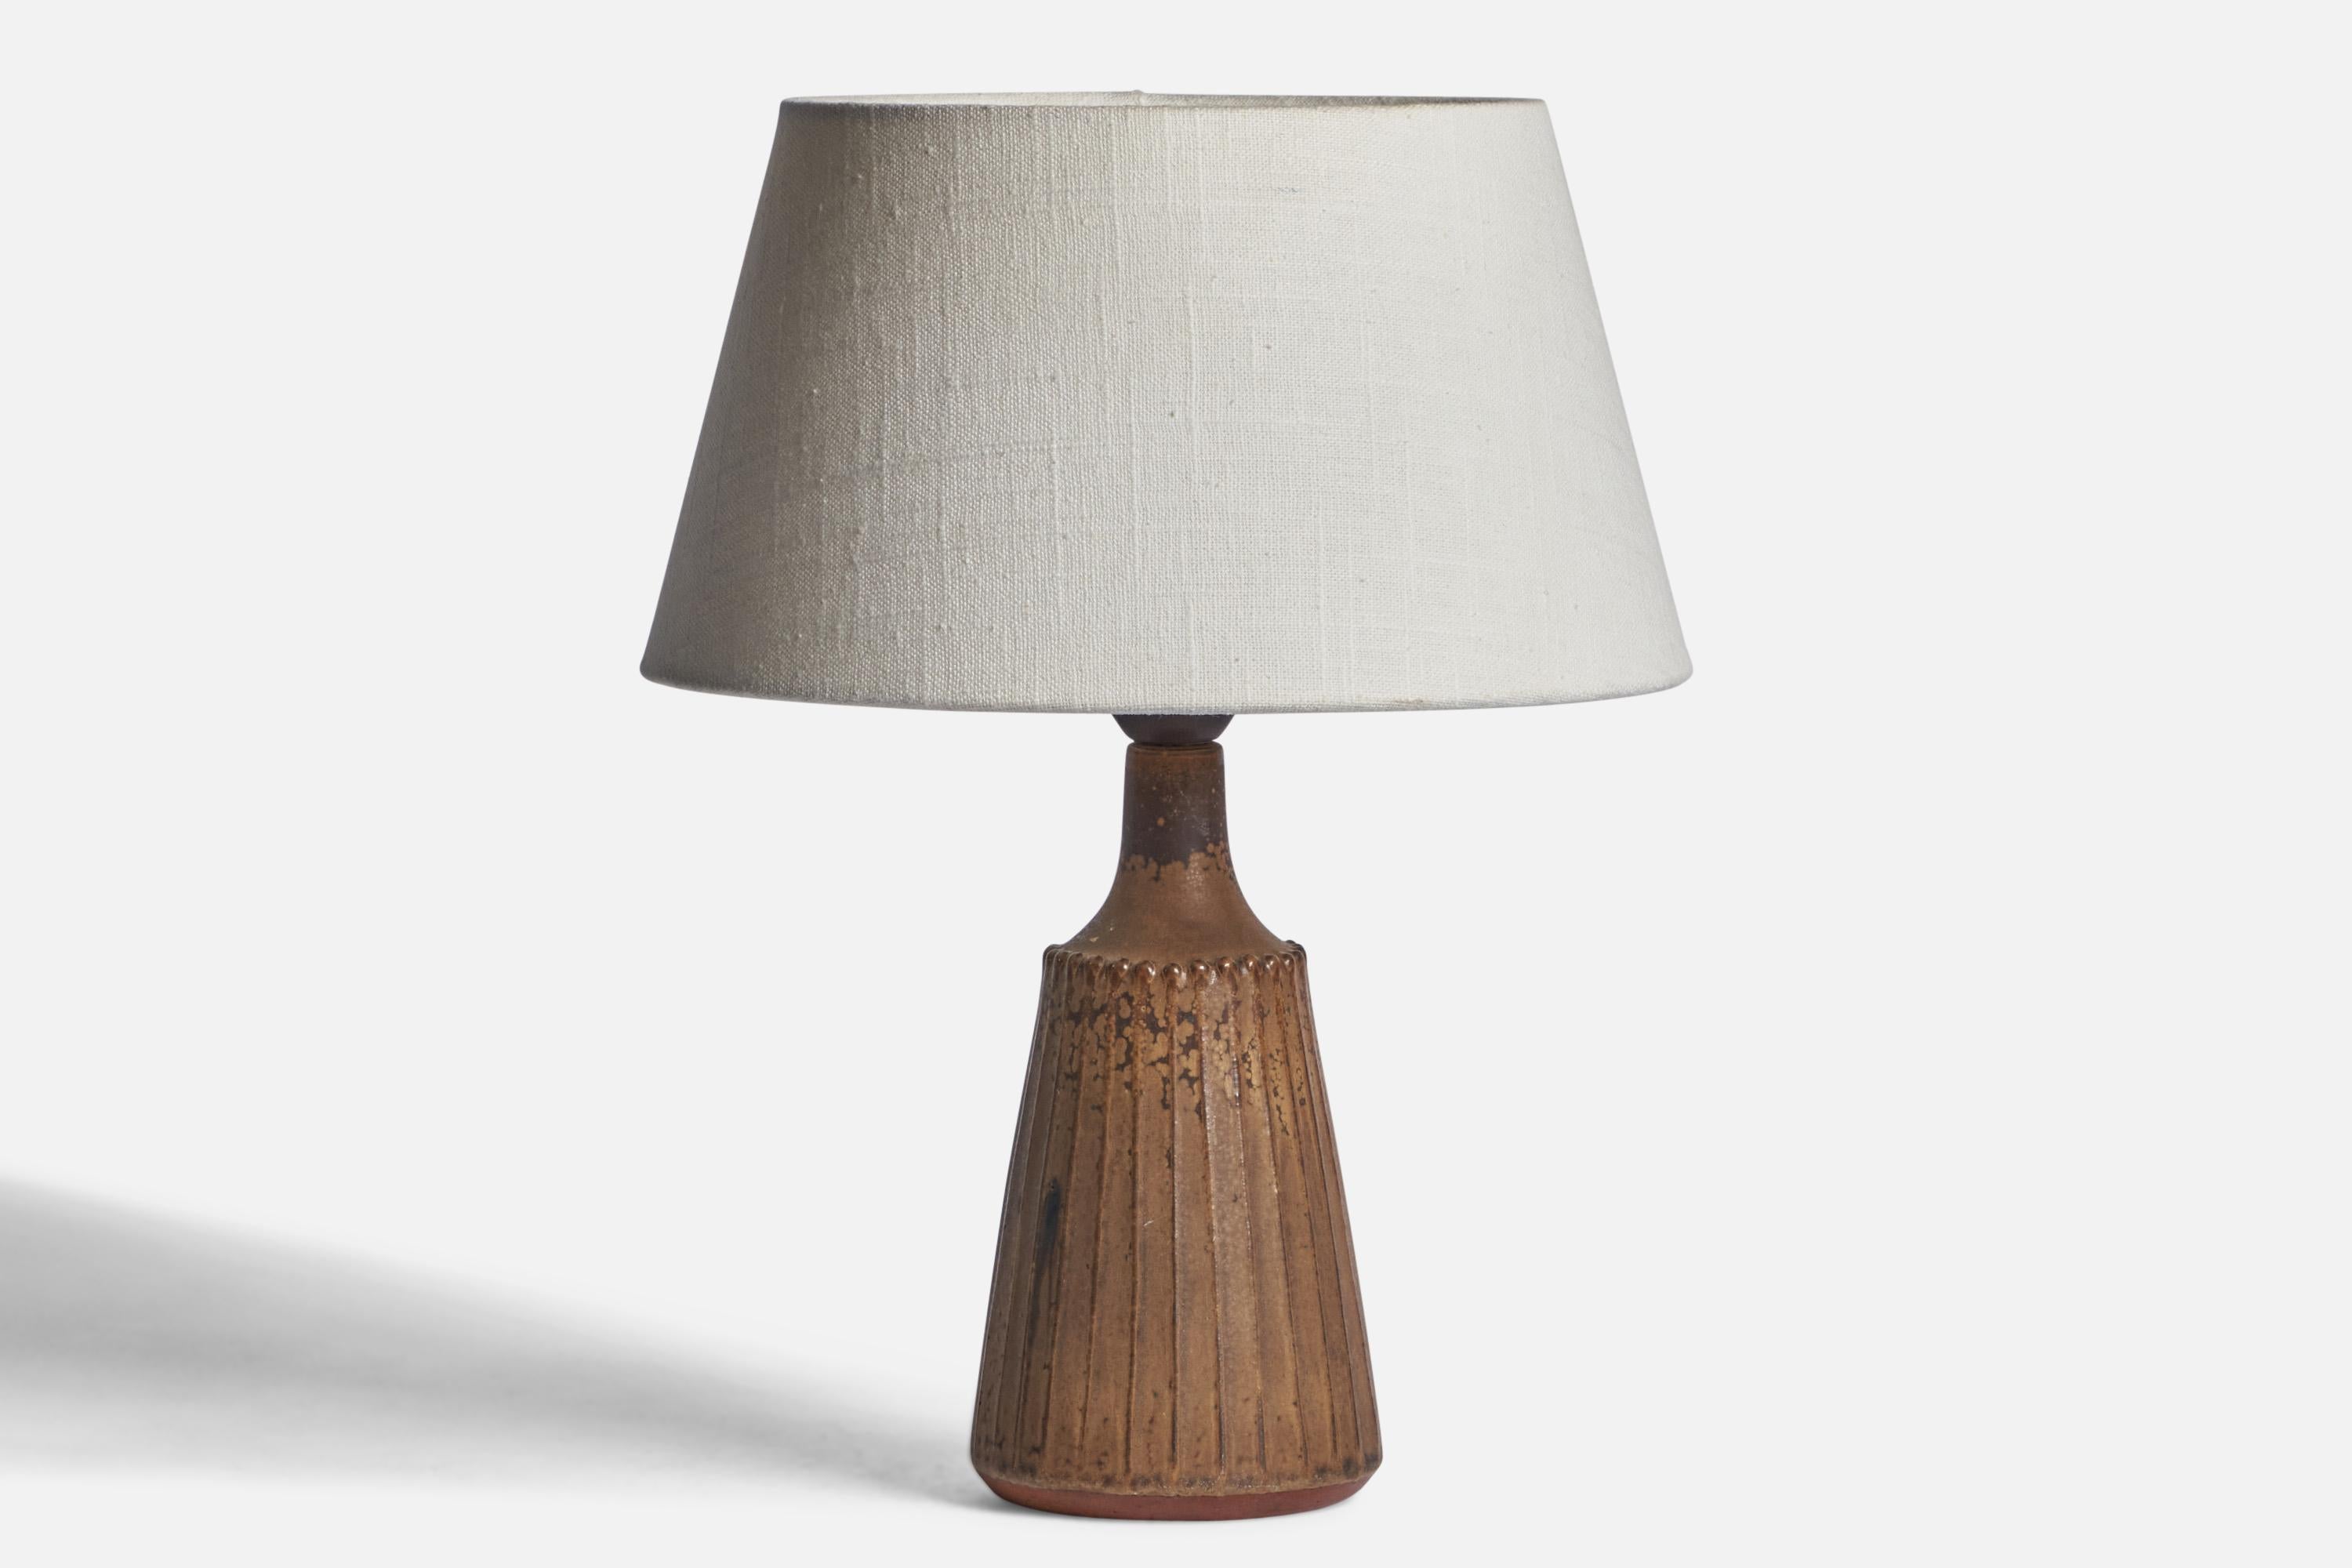 
A brown-glazed stoneware table lamp designed and produced by Rolf Palm, Mölle, Sweden, 1960s.
Dimensions of Lamp (inches): 10.35” H x 4” Diameter
Dimensions of Shade (inches): 7” Top Diameter x 10” Bottom Diameter x 5.5” H 
Dimensions of Lamp with